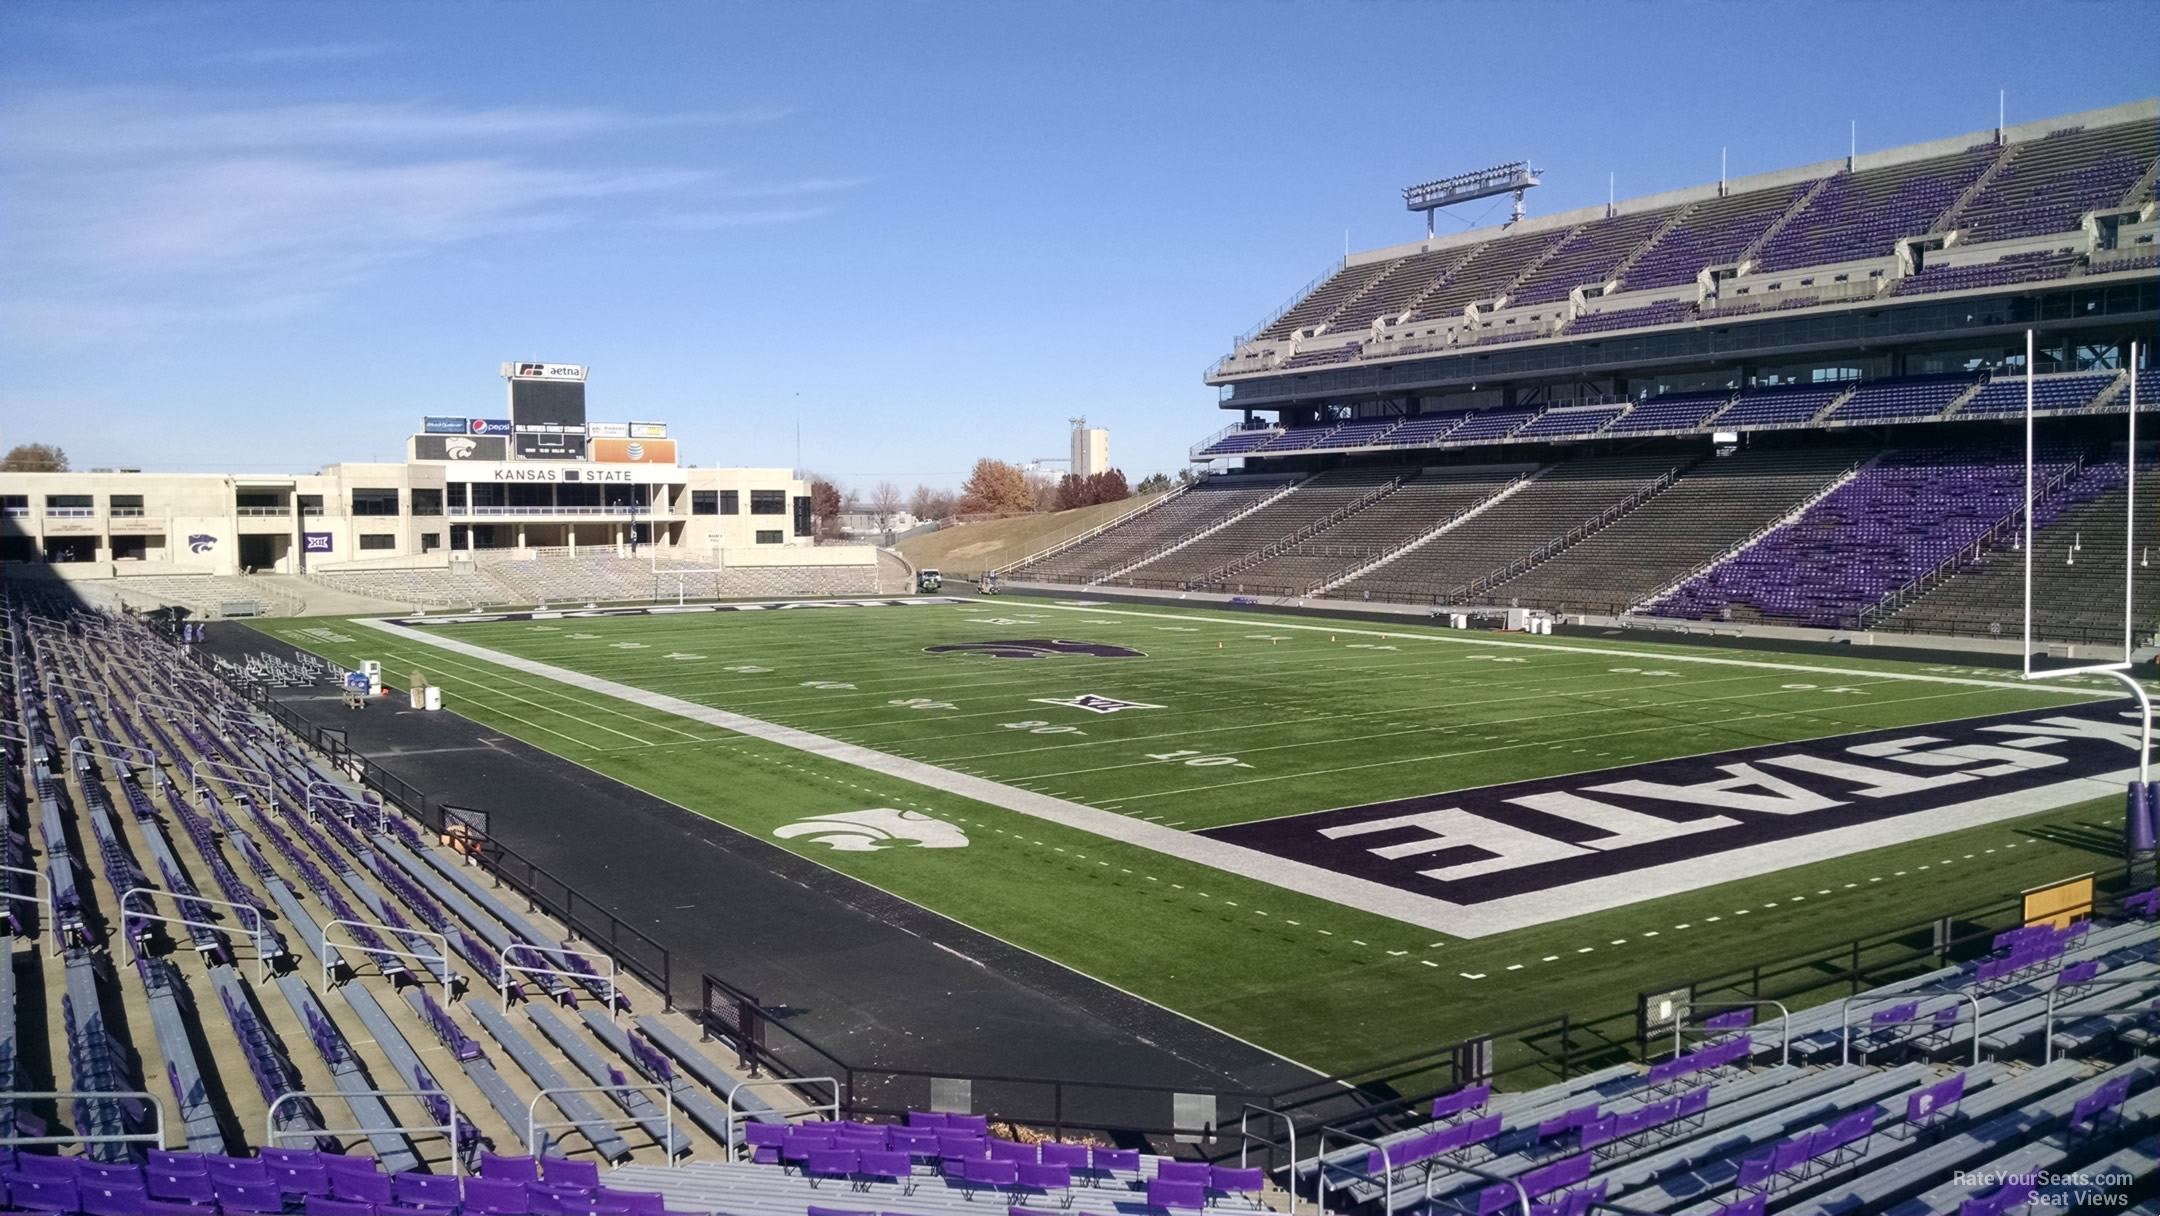 Section 11 at Bill Snyder Family Stadium